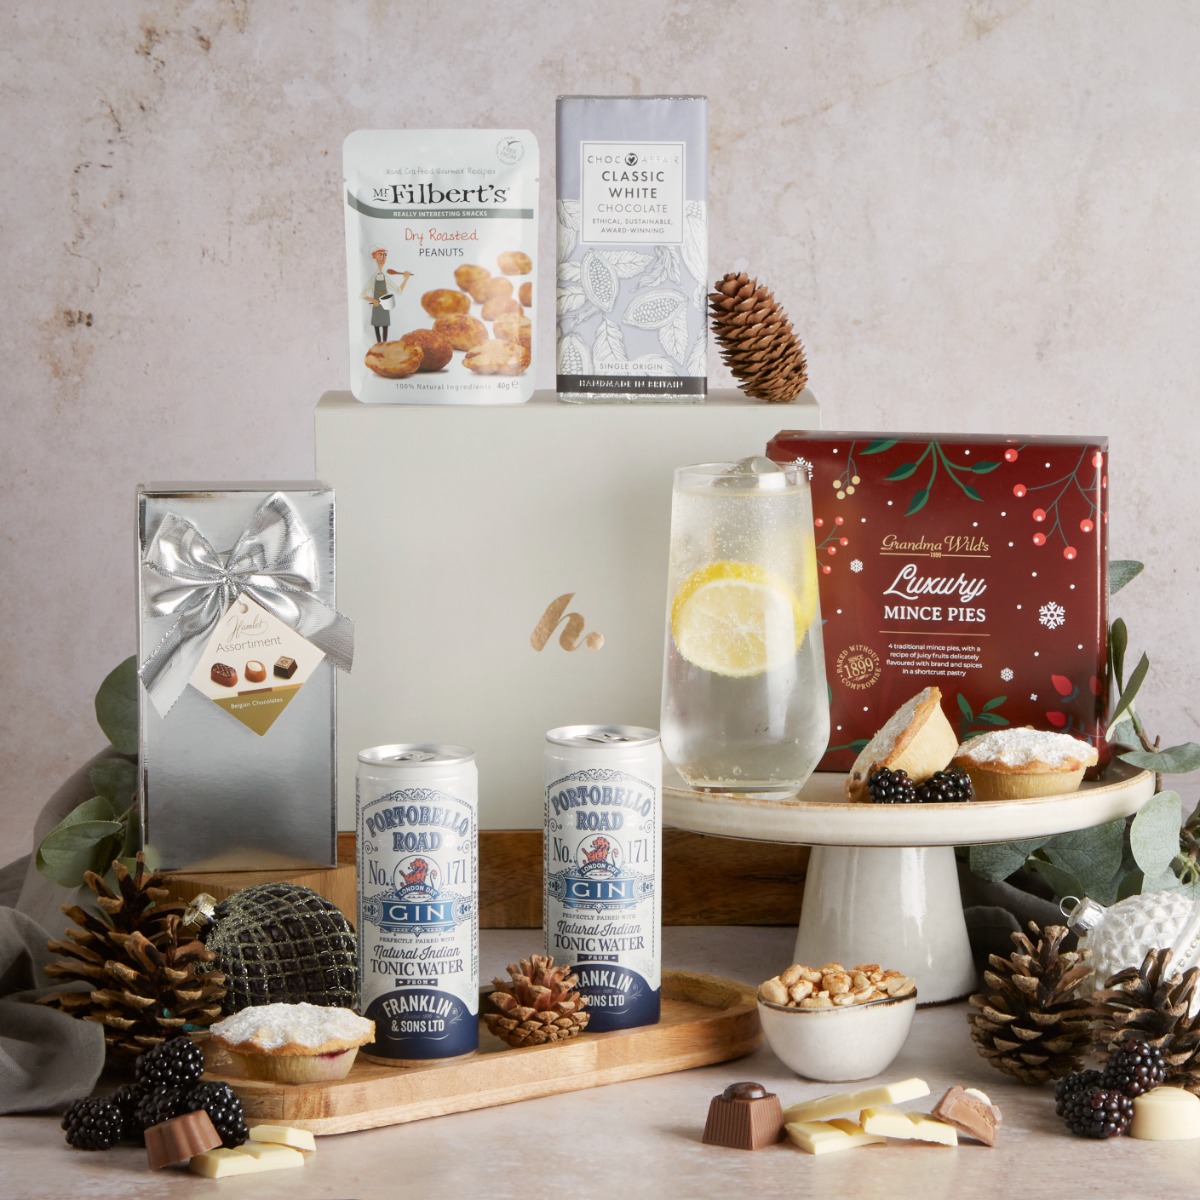 Festive Gin and Treat with contents on display and Christmas decor 